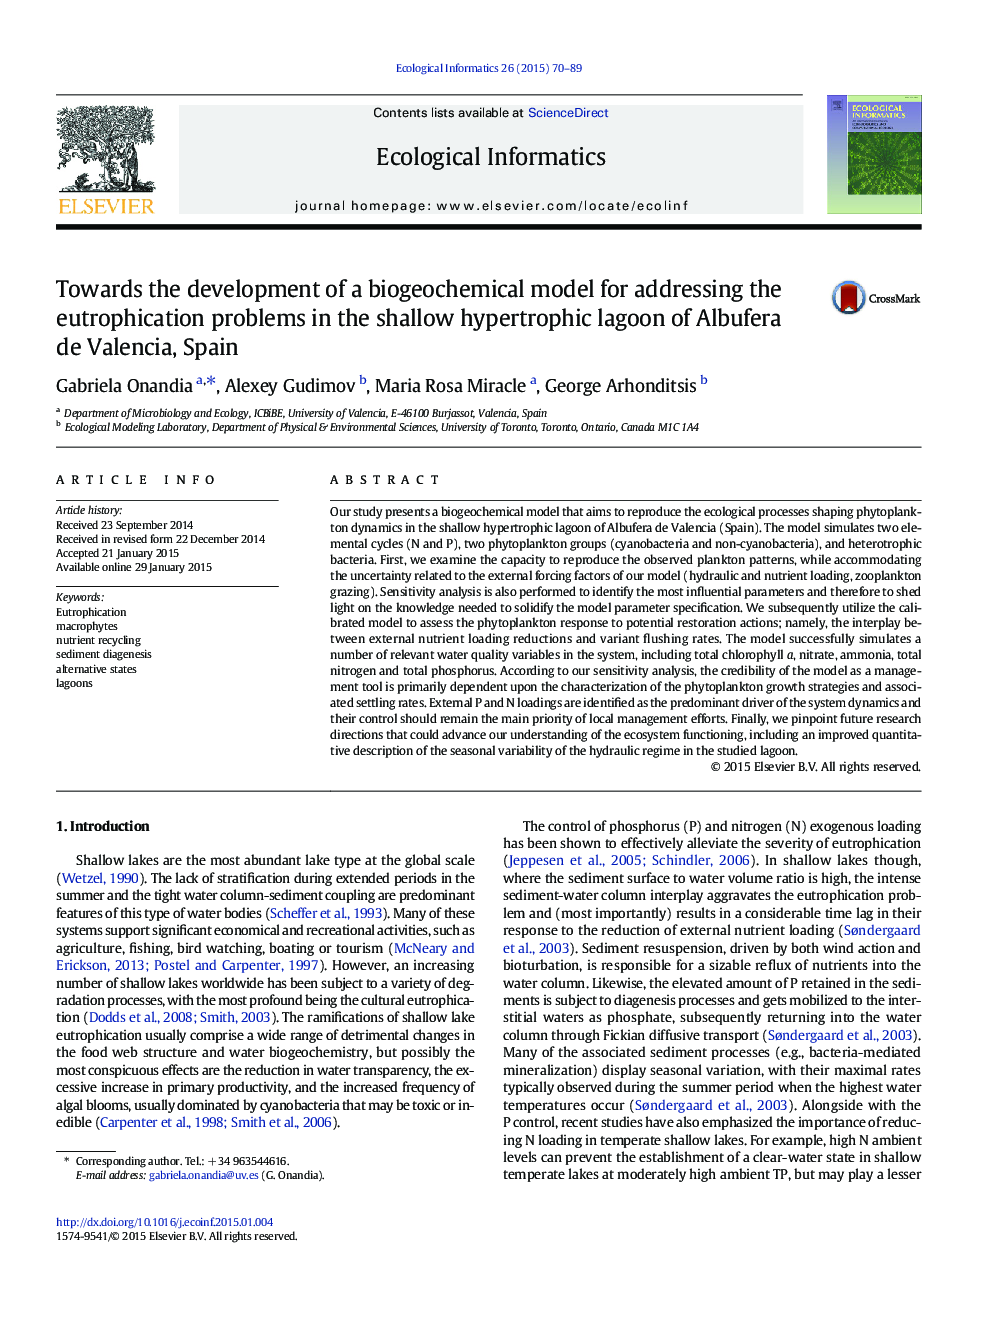 Towards the development of a biogeochemical model for addressing the eutrophication problems in the shallow hypertrophic lagoon of Albufera de Valencia, Spain